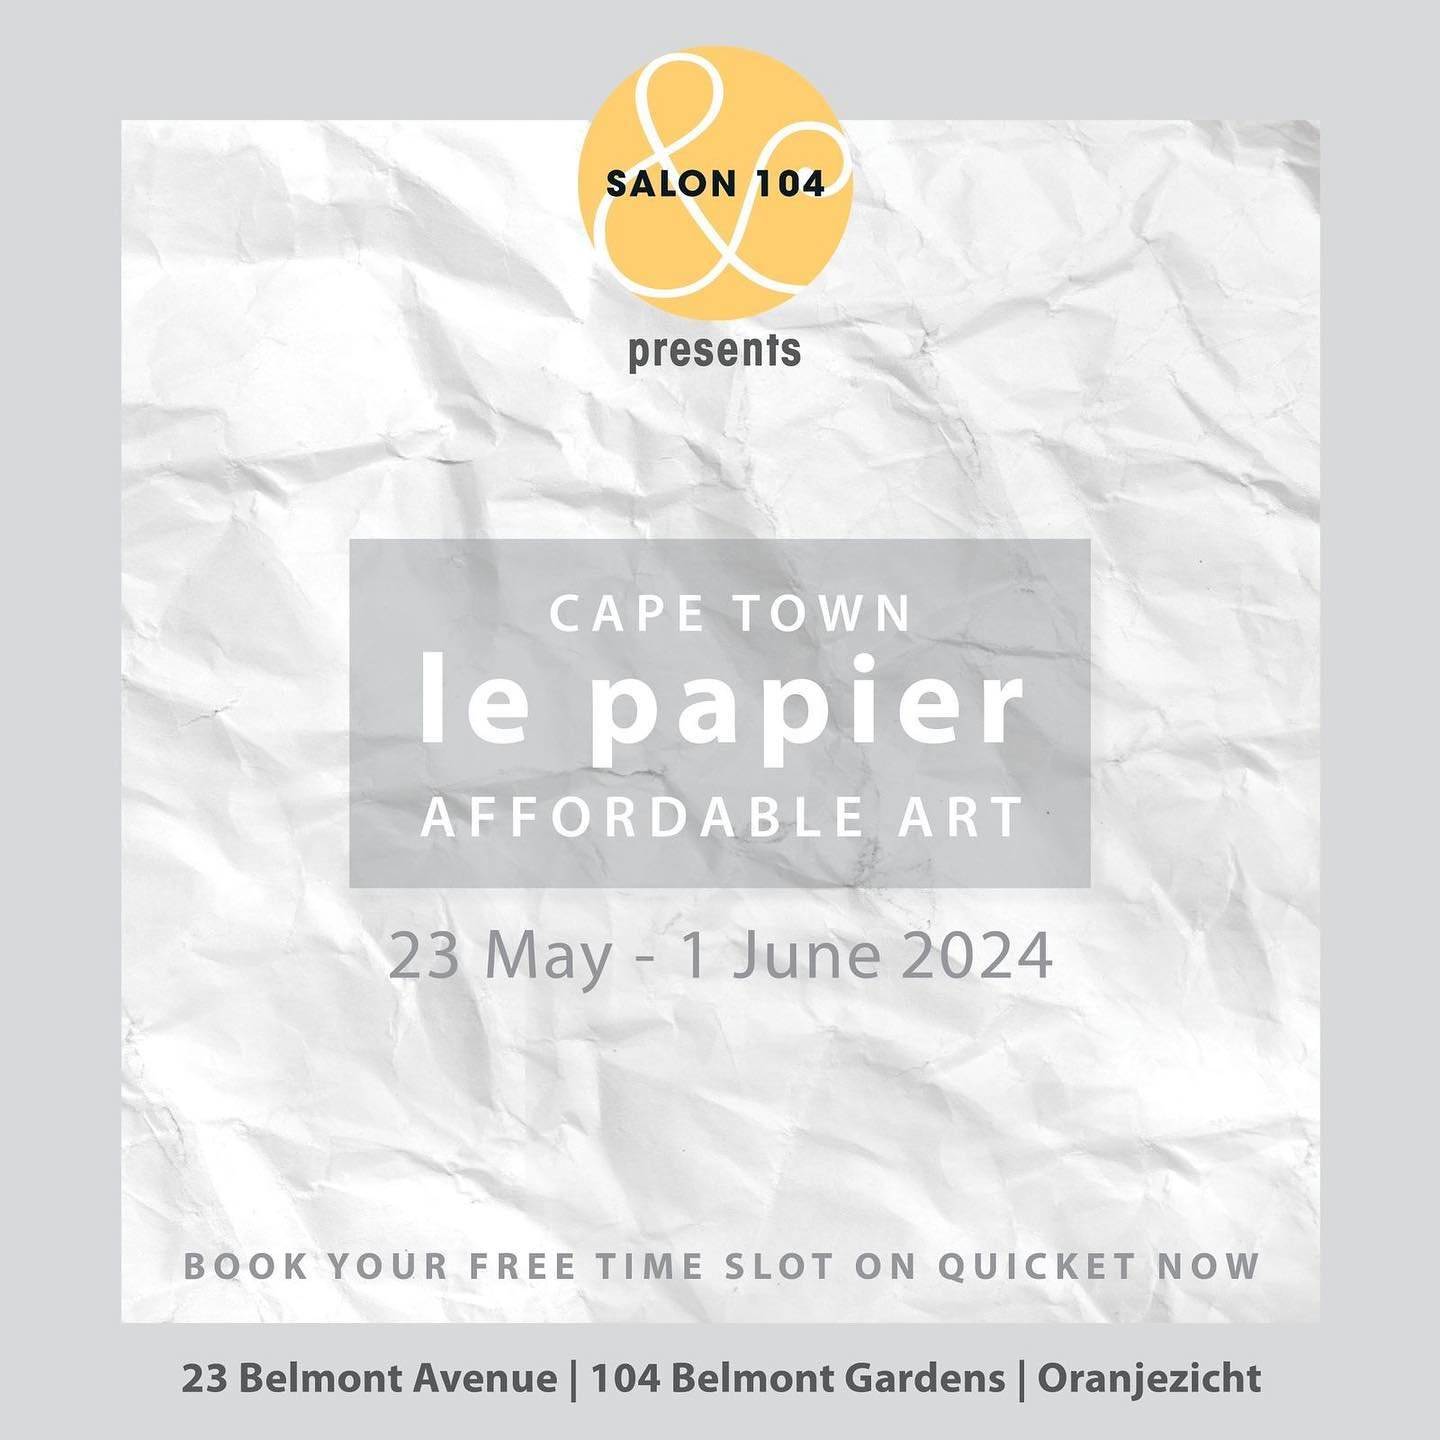 Here are all the details for our @salon104.art Le Papier exhibition, opening in just under two weeks!

Book your free ticket now on Quicket to have access to this unique art exhibition. No entry without a ticket. Link: https://qkt.io/13iCuE

Dates an